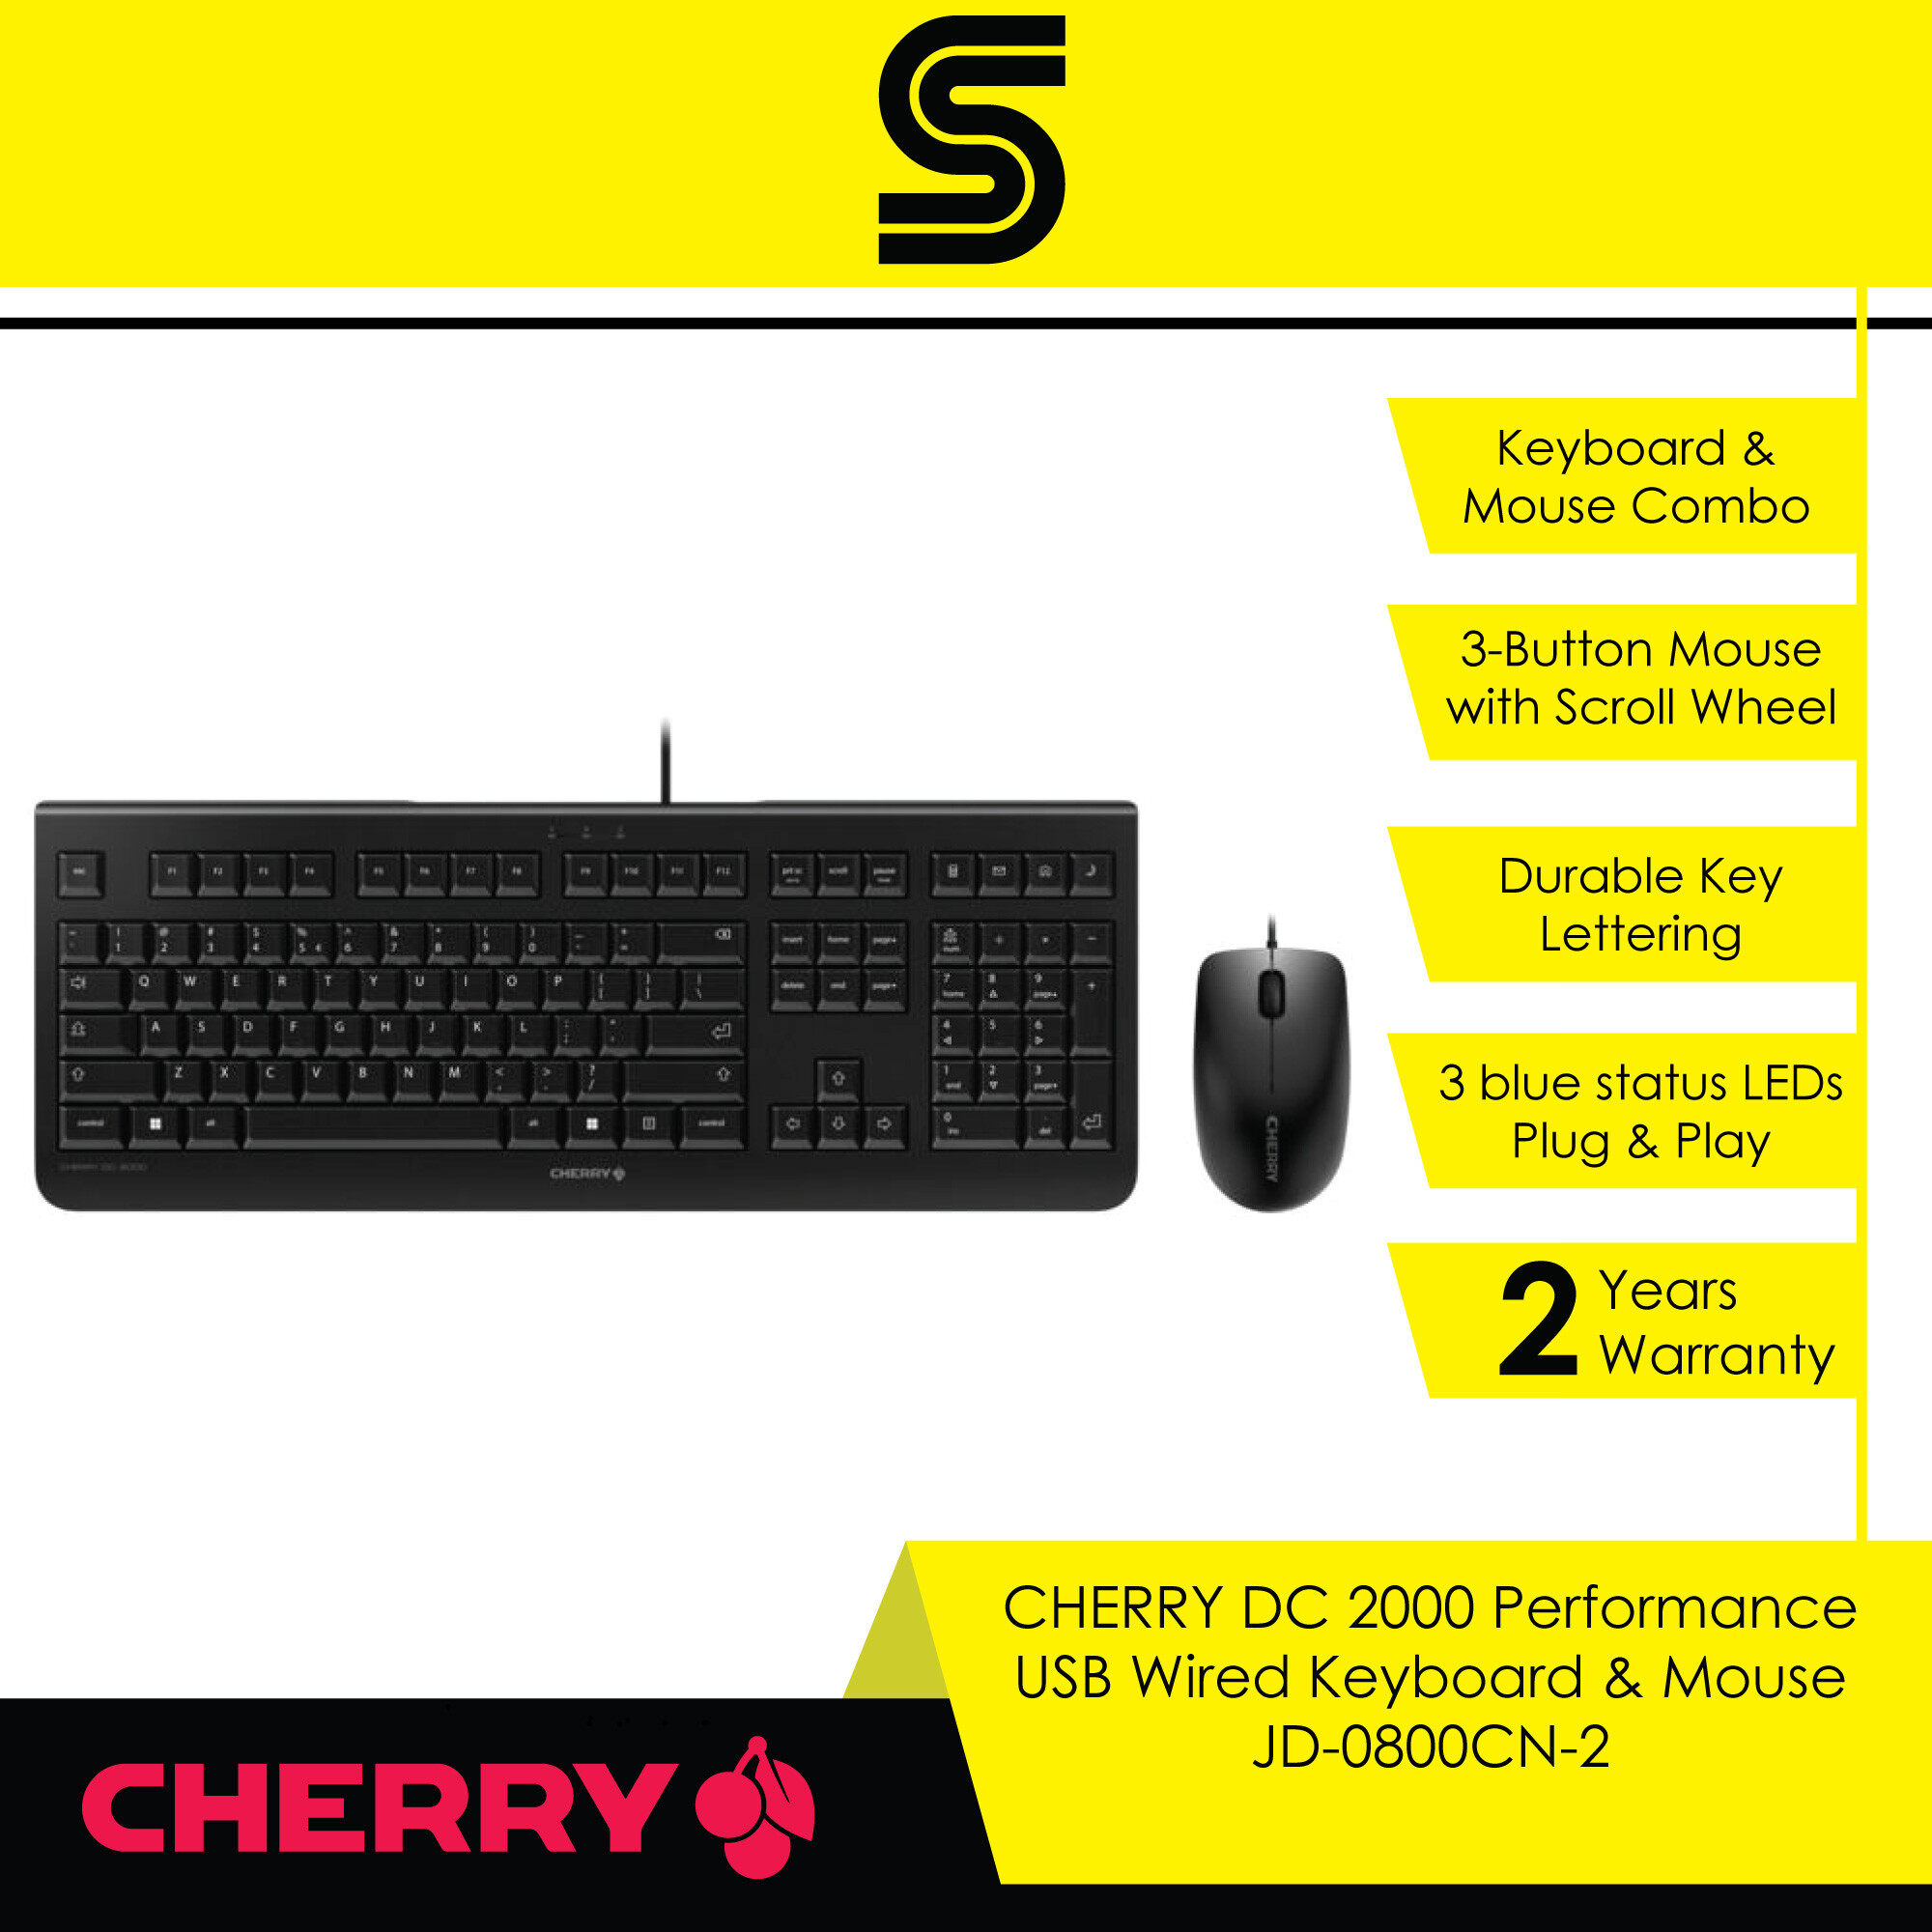 CHERRY DC 2000 Performance USB Wired Keyboard & Mouse - JD-0800CN-2